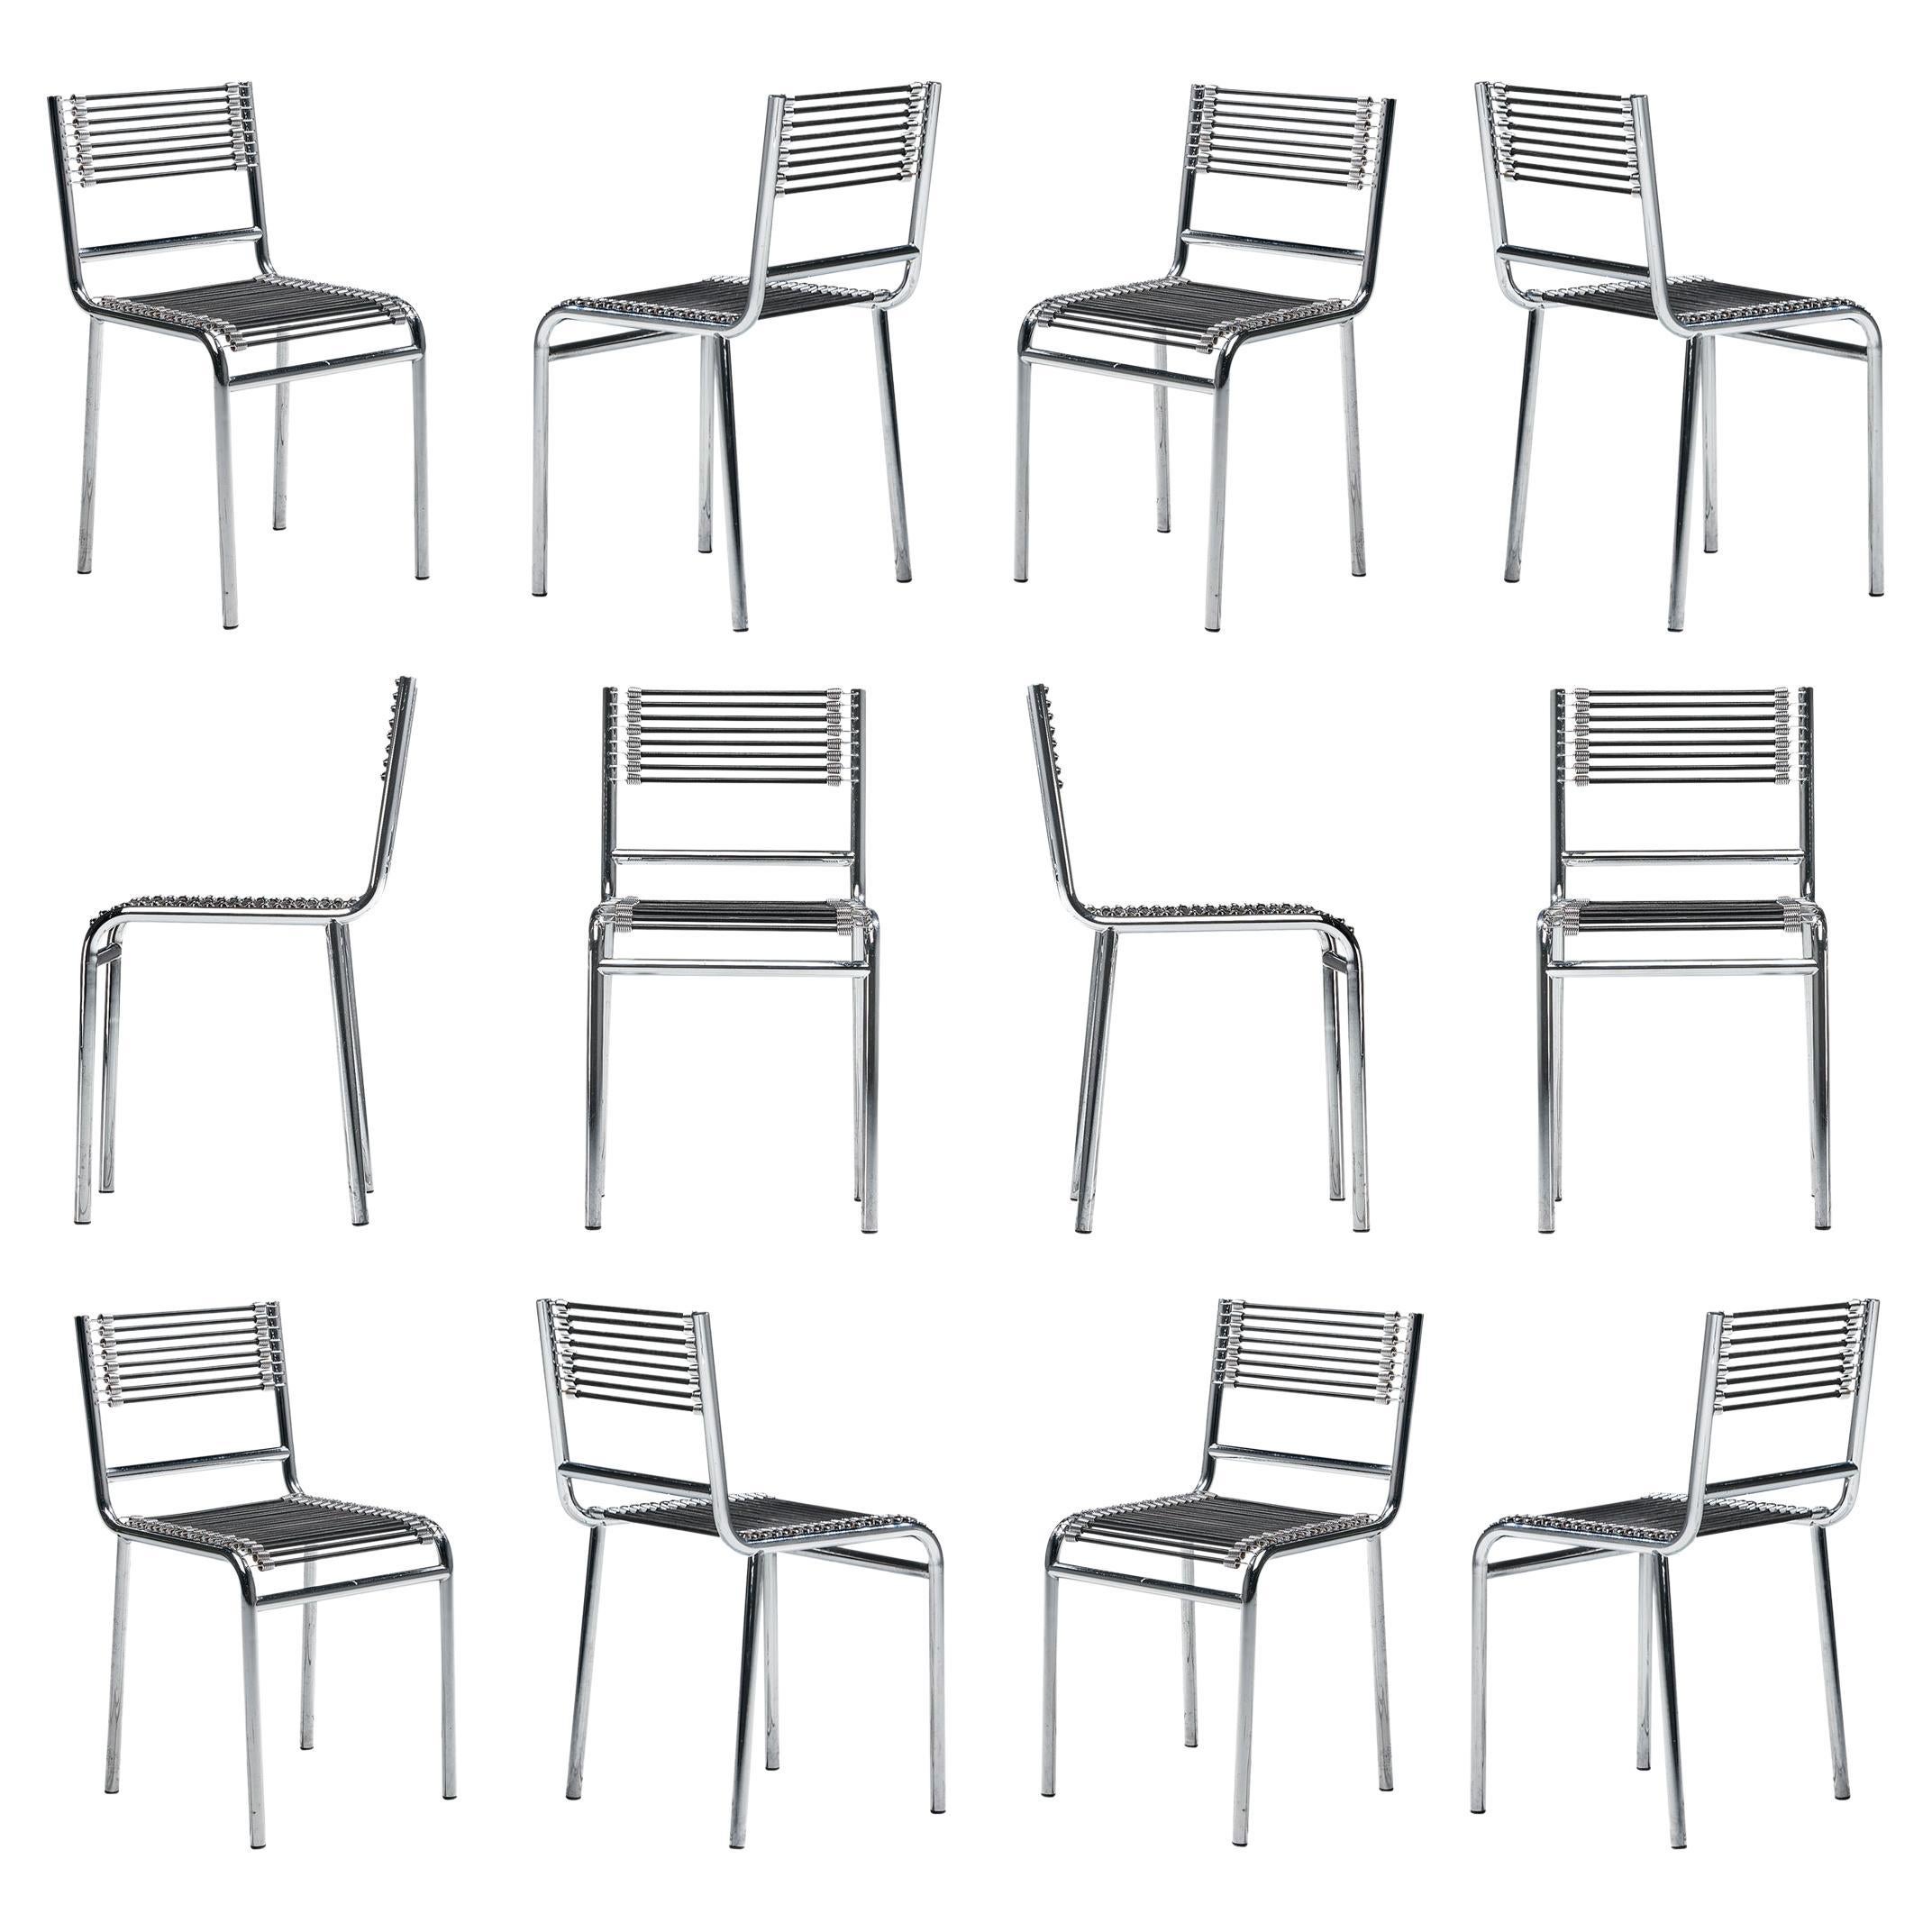 René Herbst 'Sandows' Dining Chairs in Steel and Cord